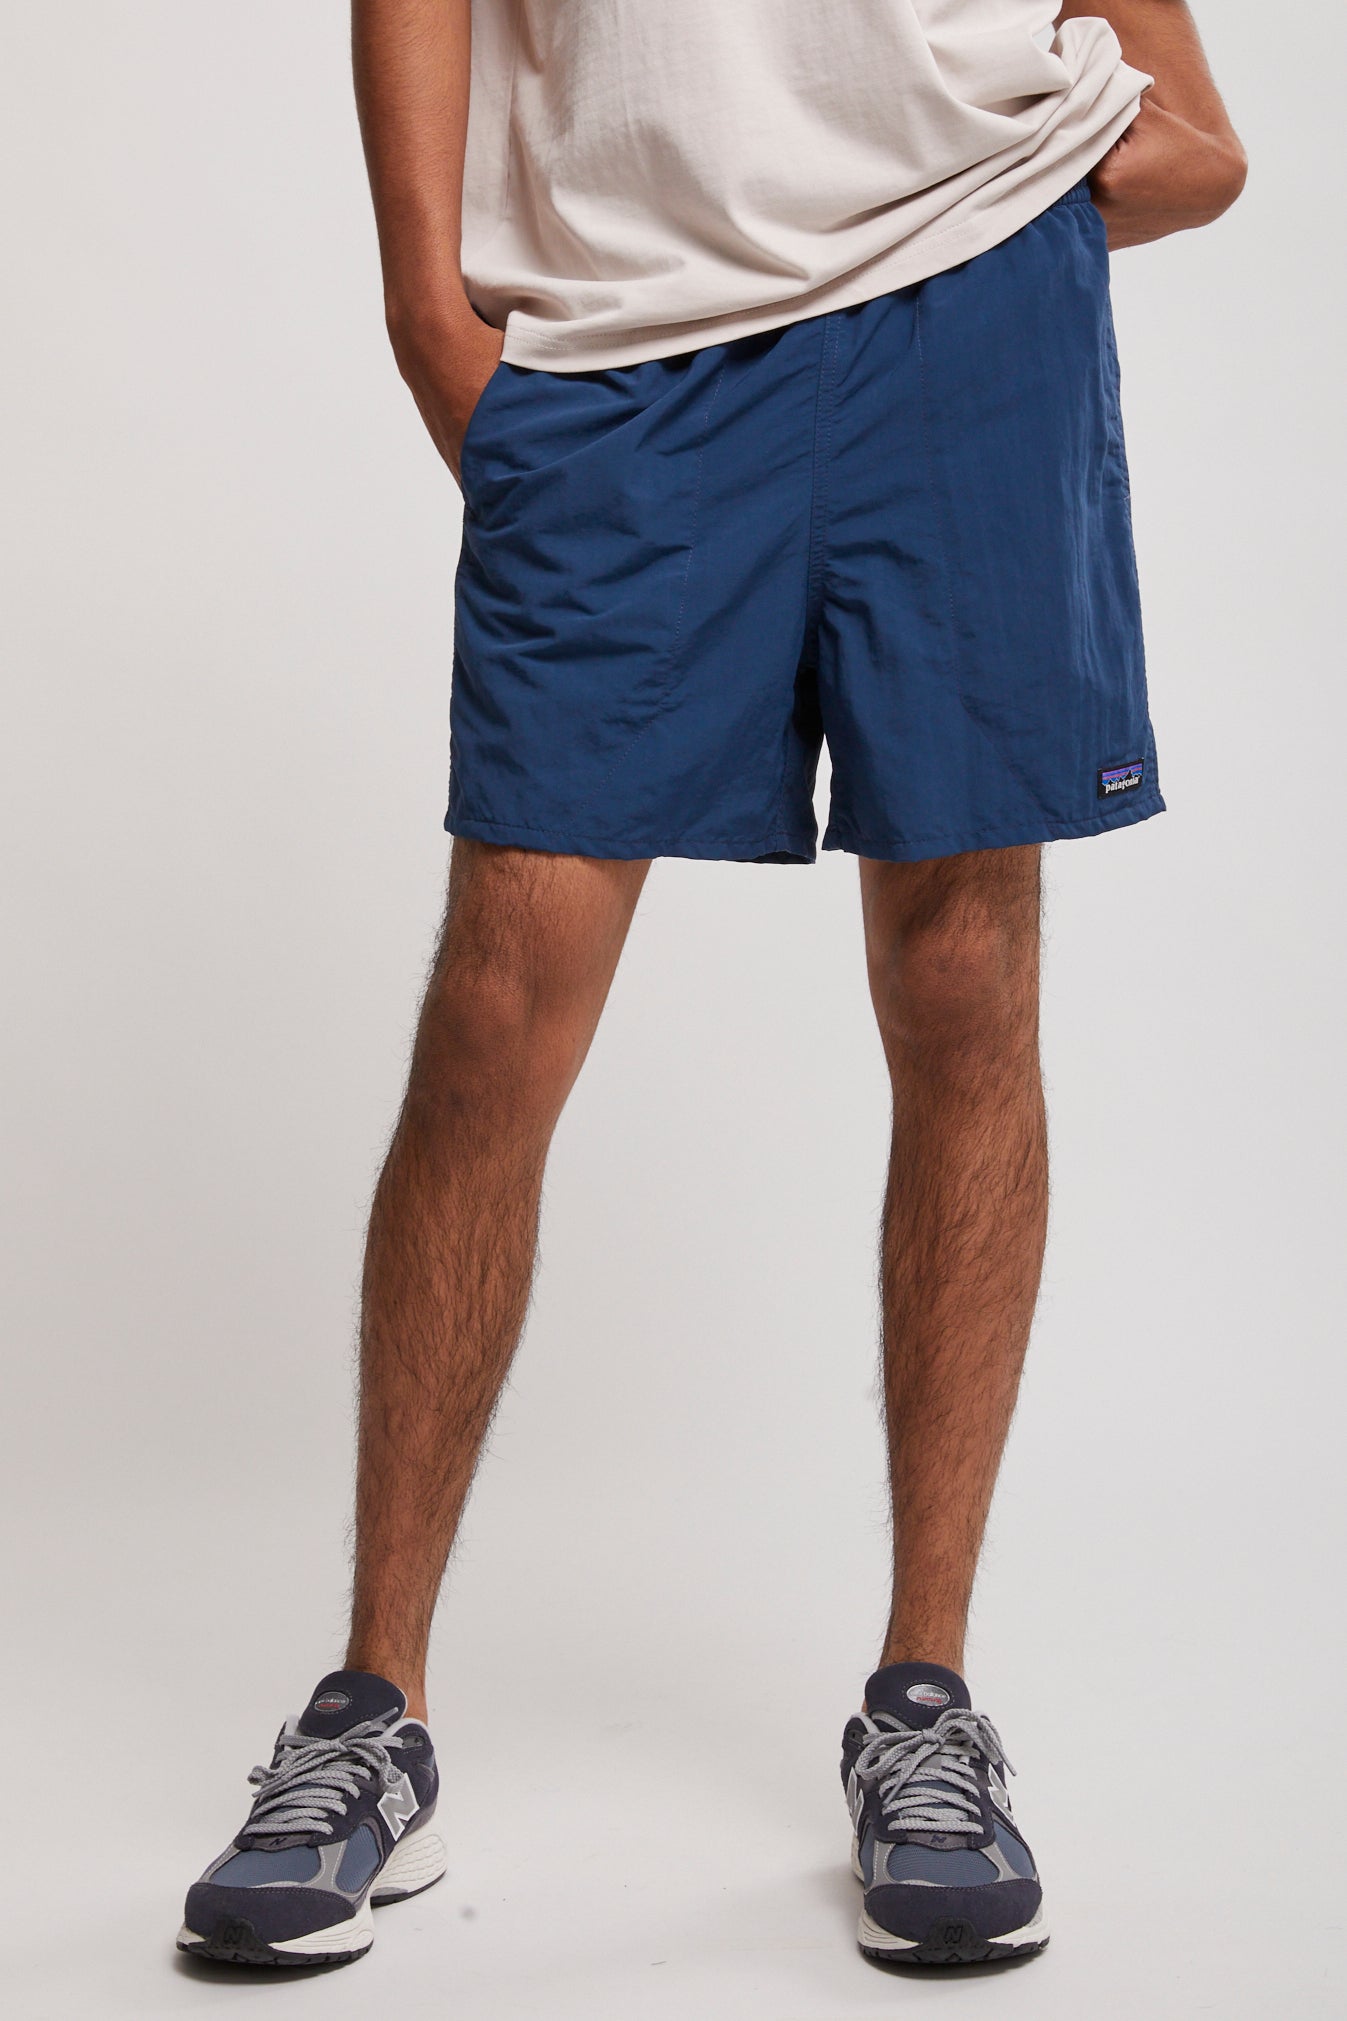 https://www.northbeach.co.nz/content/products/ms-baggies-shorts-5-in-tidepool-blue-1-pat57022.jpg